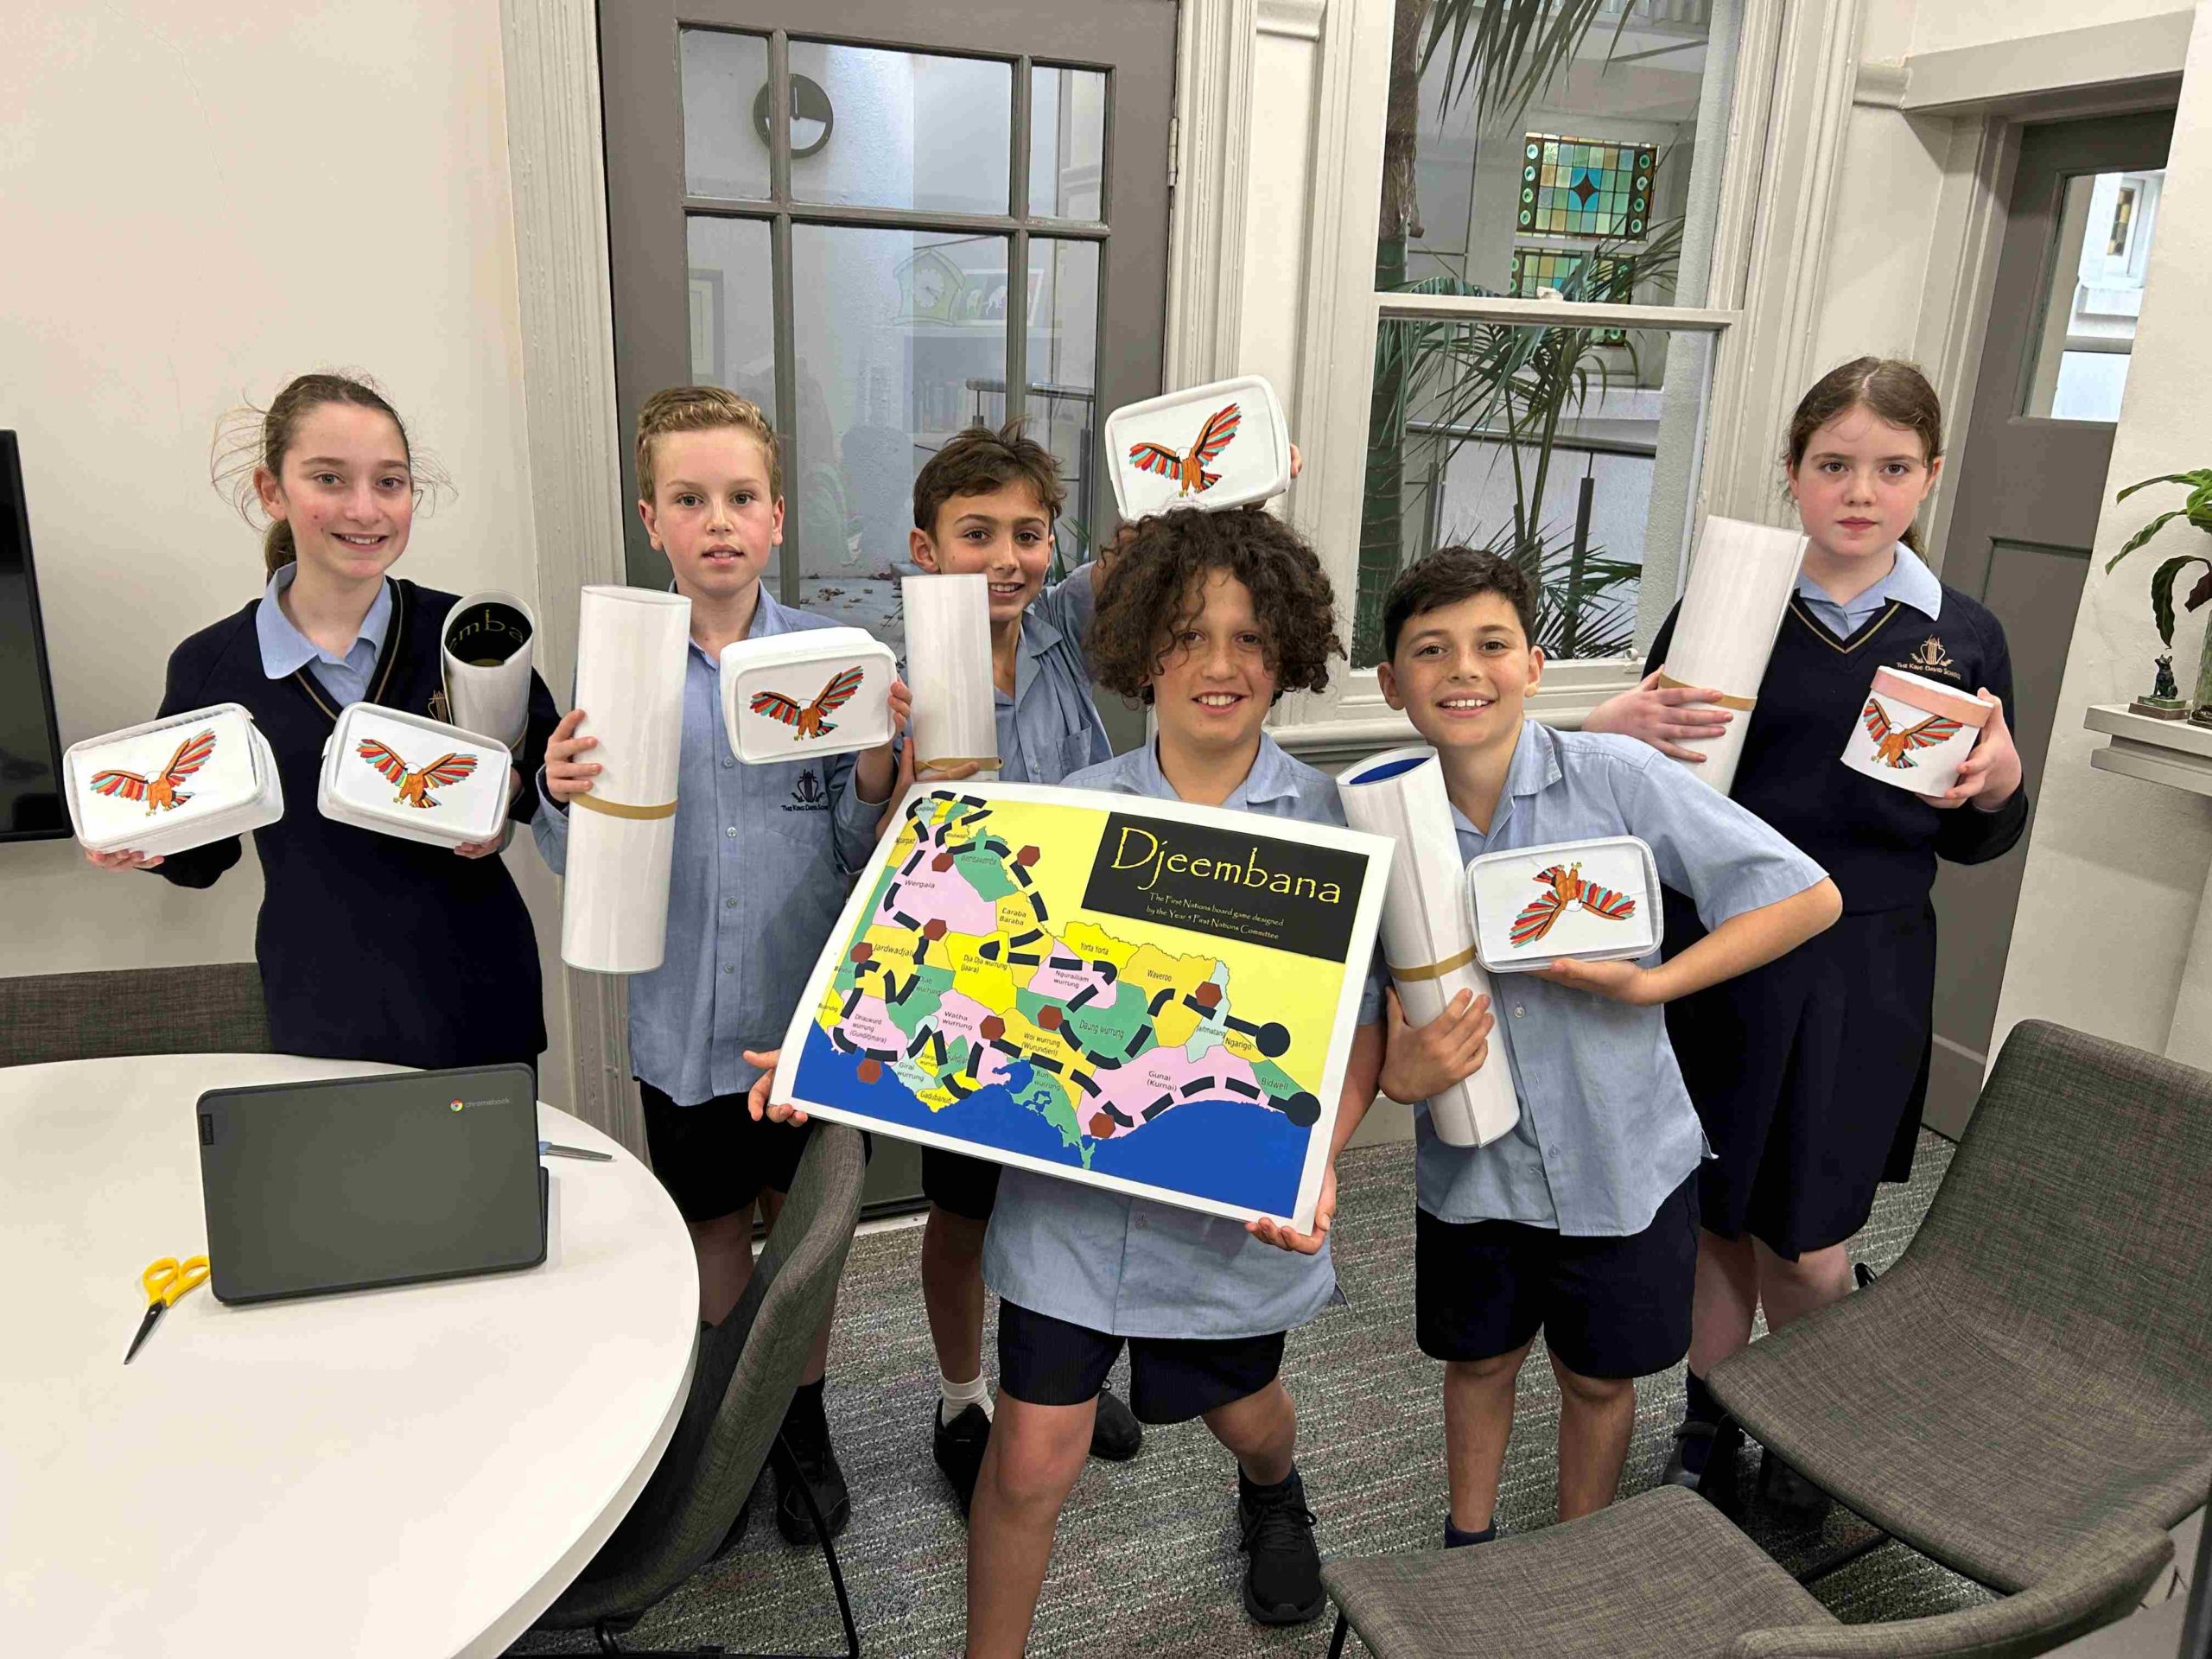 Year 5 students pose with the First Nations education game they have created.